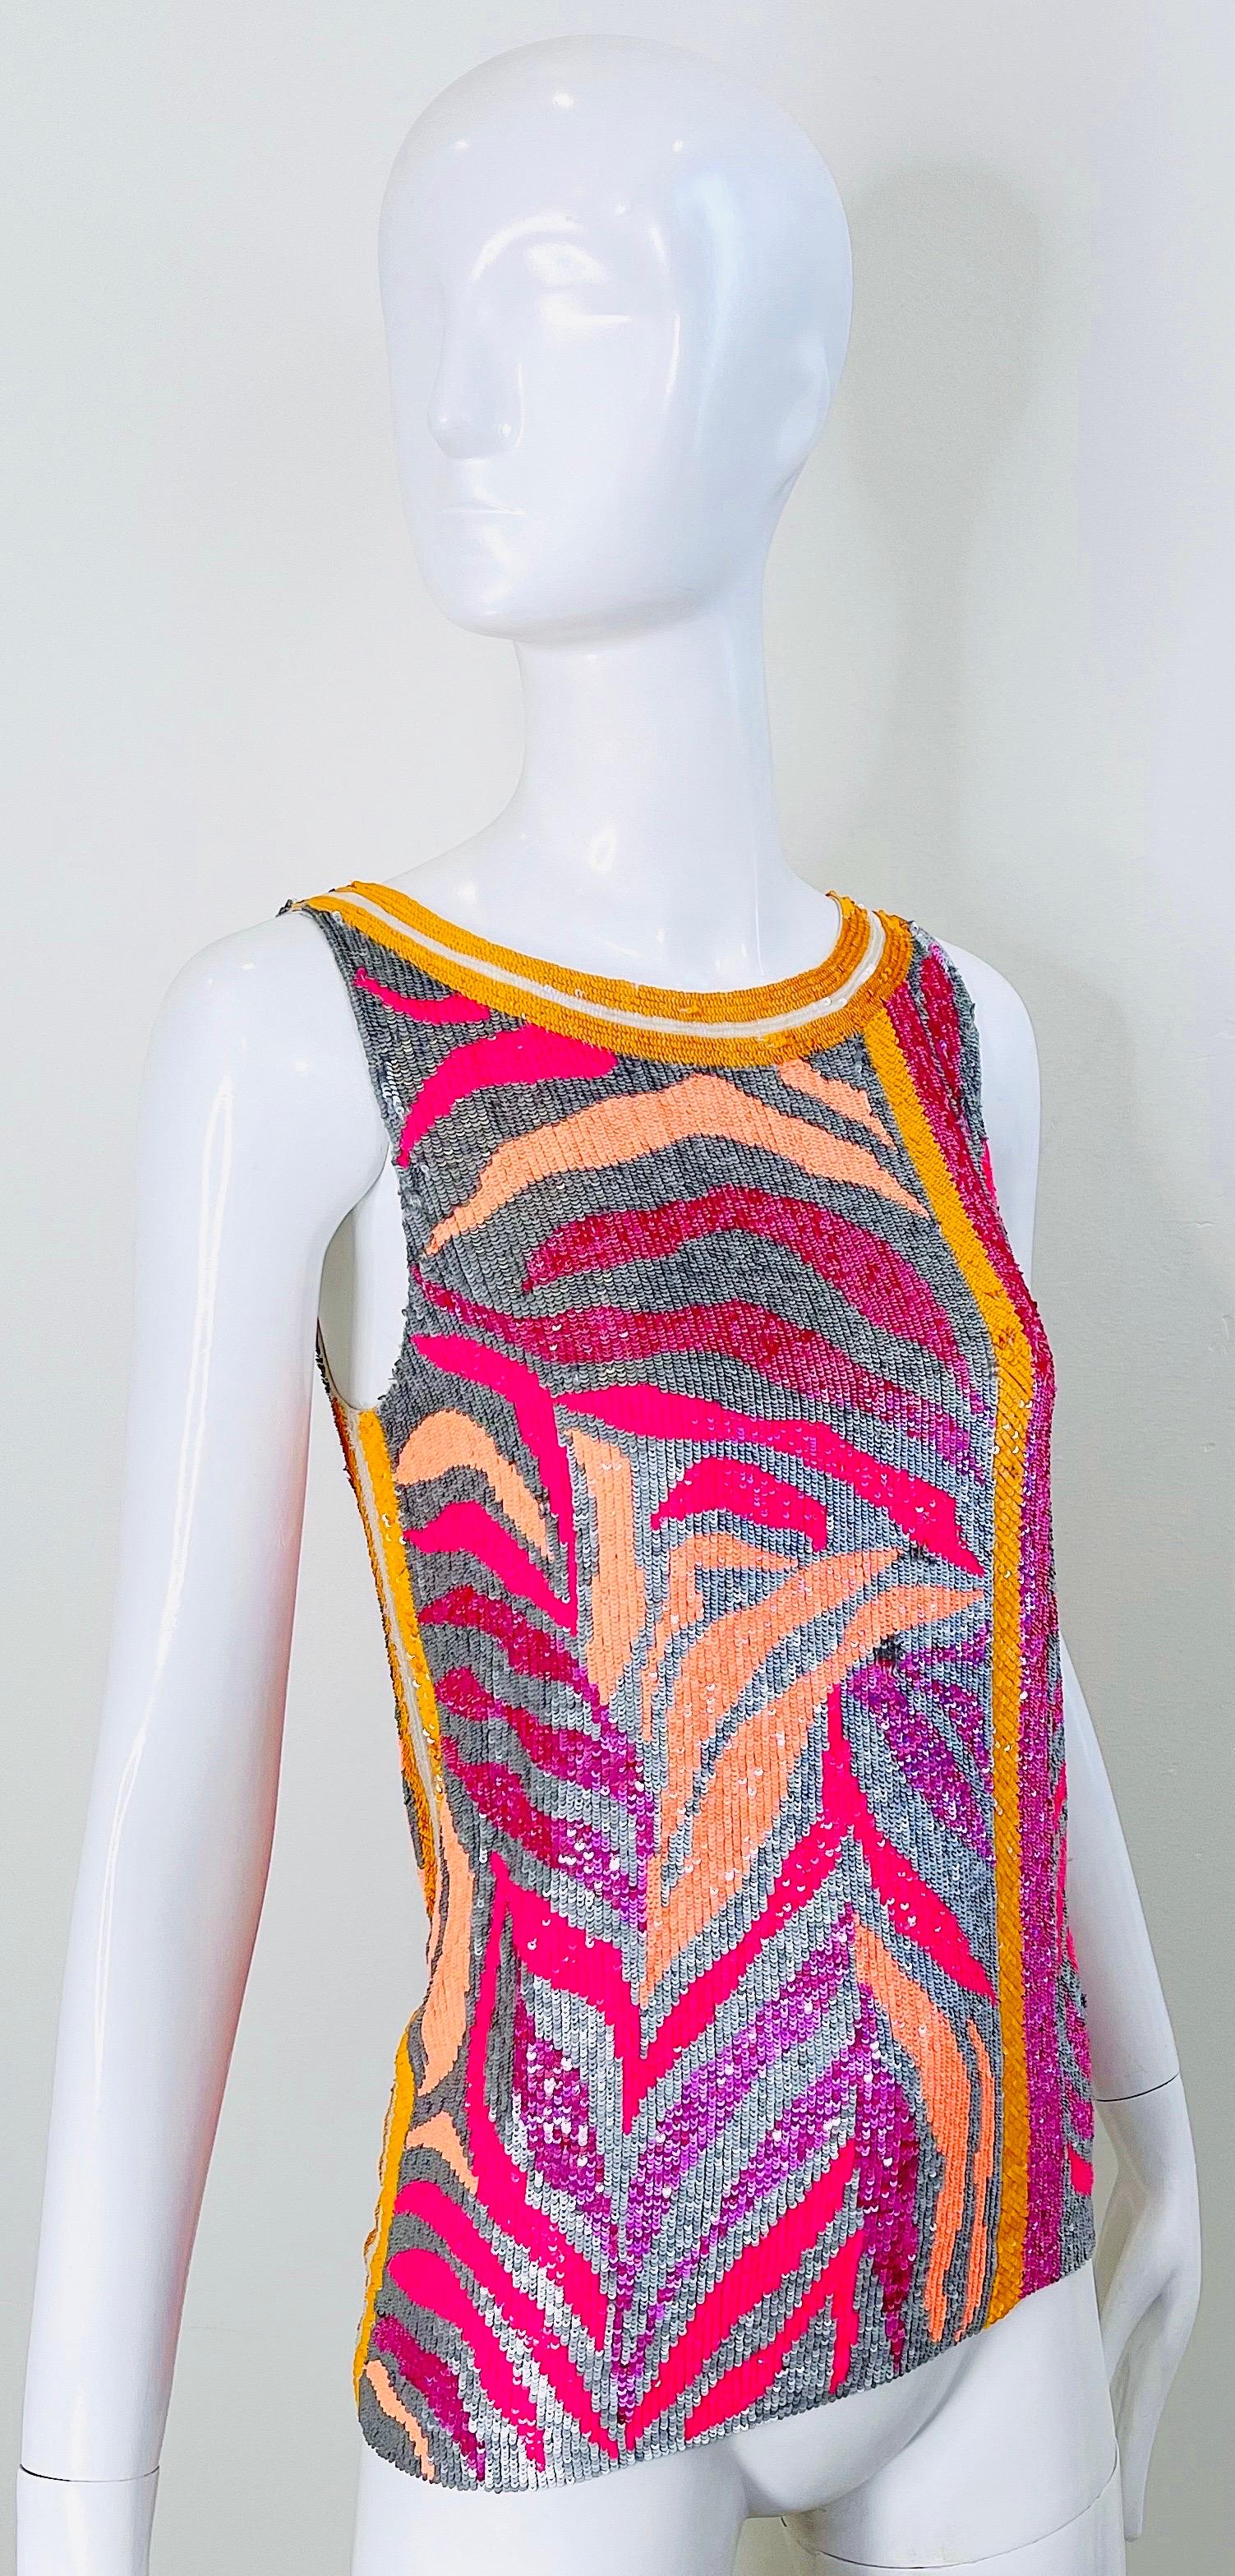 NWT Blumarine Couture Runway Spring 2008 Size 6 Sequin Pink Orange Zebra Top In New Condition For Sale In San Diego, CA